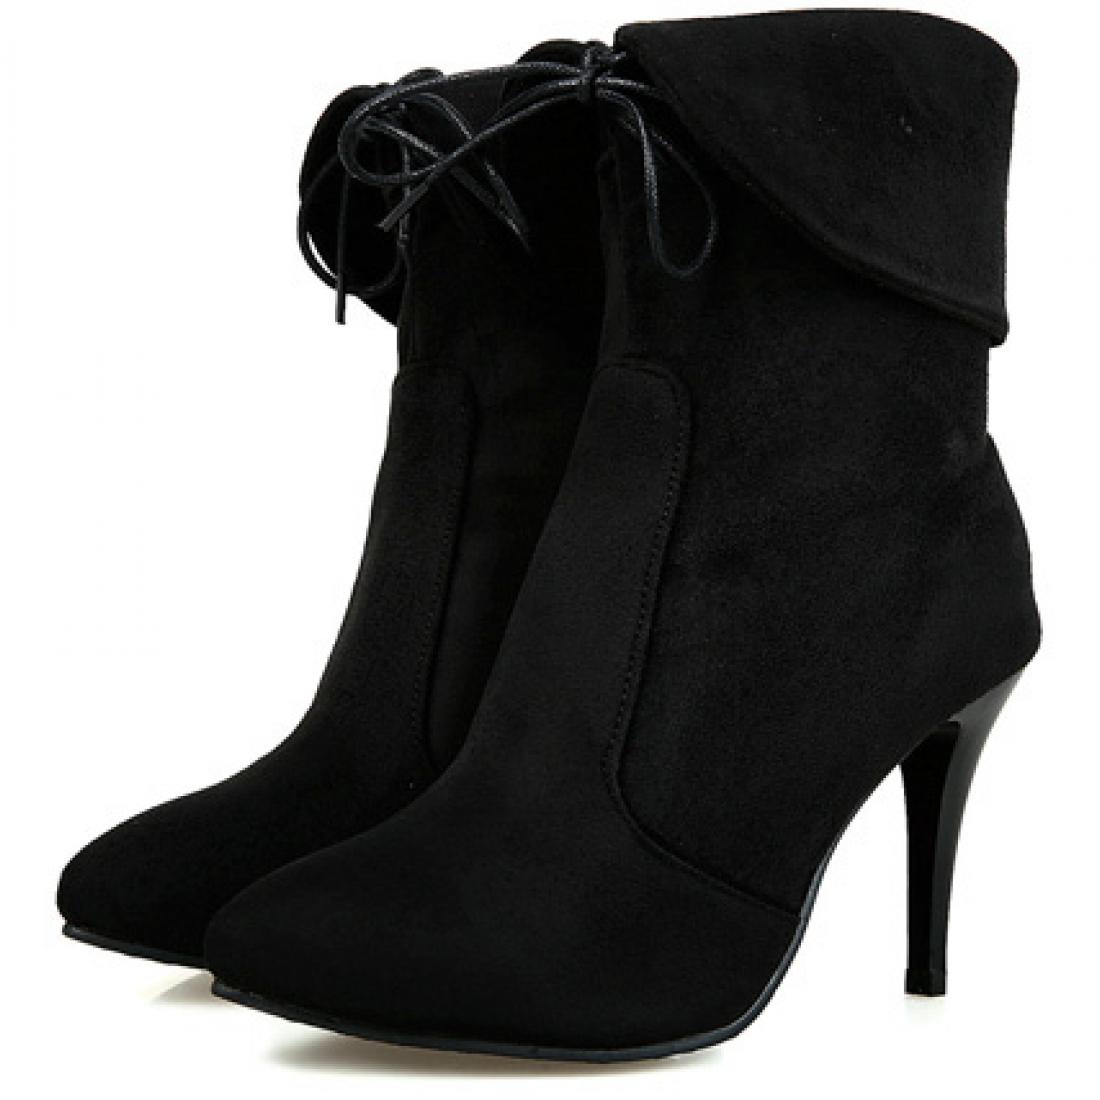 Black Suede Lace Up Ankle Flap High Stiletto Heels Boots ...